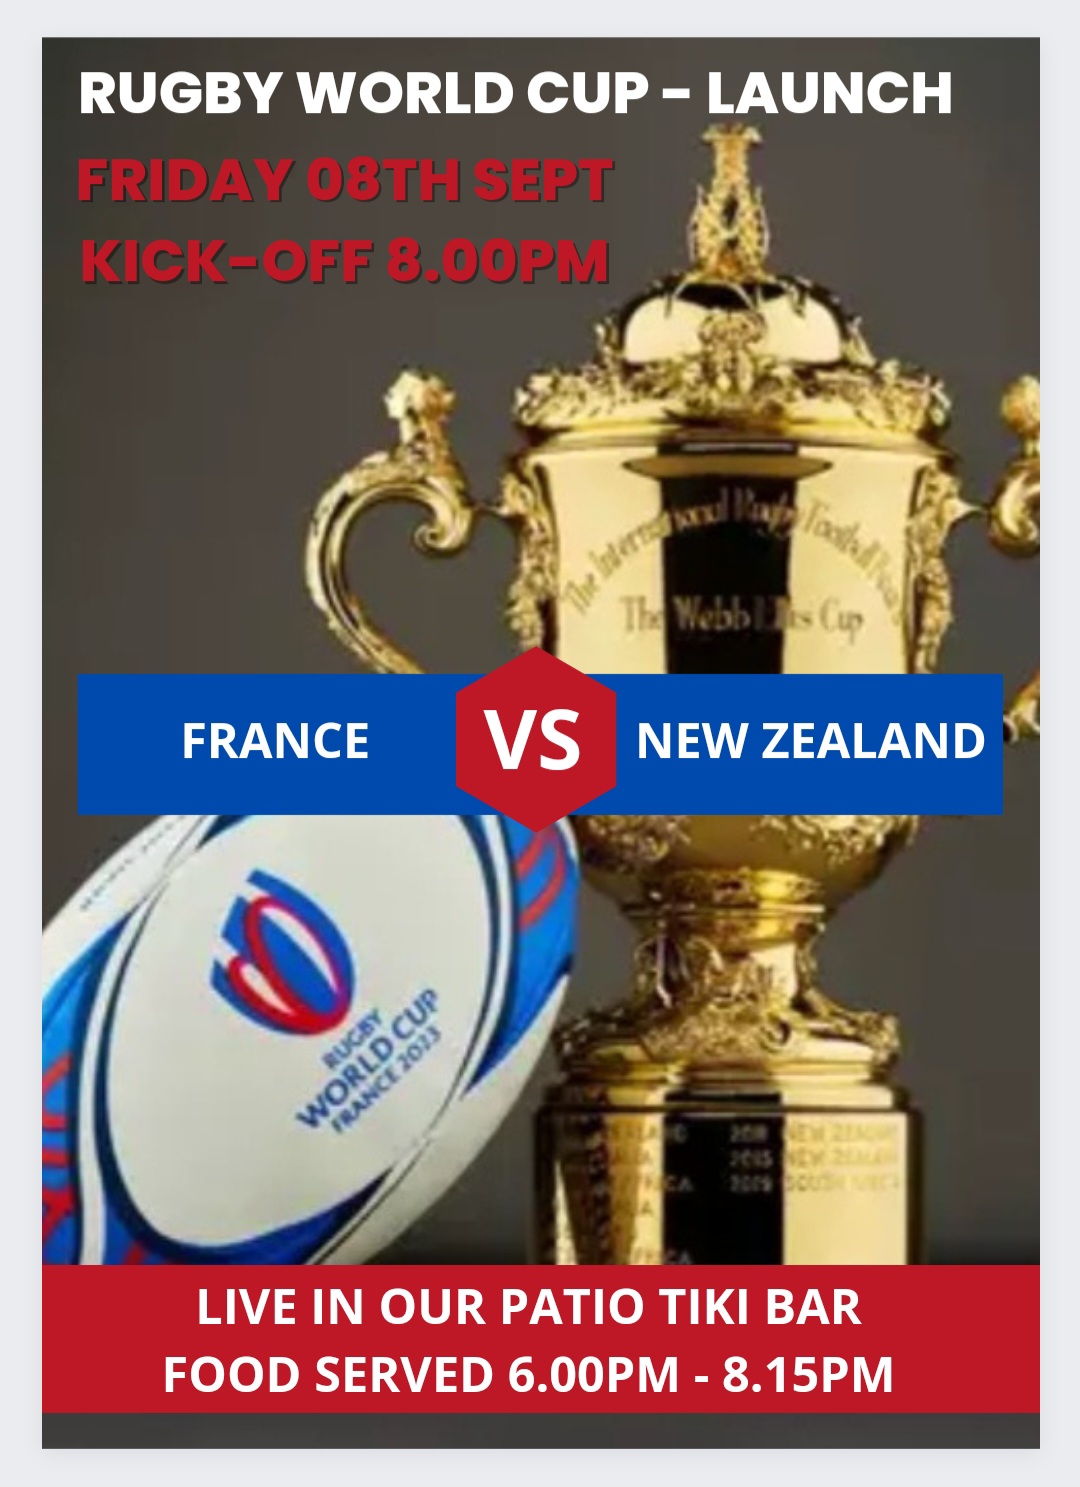 Join us in our PATIO TIKI BAR for the LAUNCH of the RUGBY WORLD CUP! FRANCE v NZ on Friday 08th September k-off 8.00pm. Food served from 6.00pm until 8.15pm ♥️🏉🏉🏉